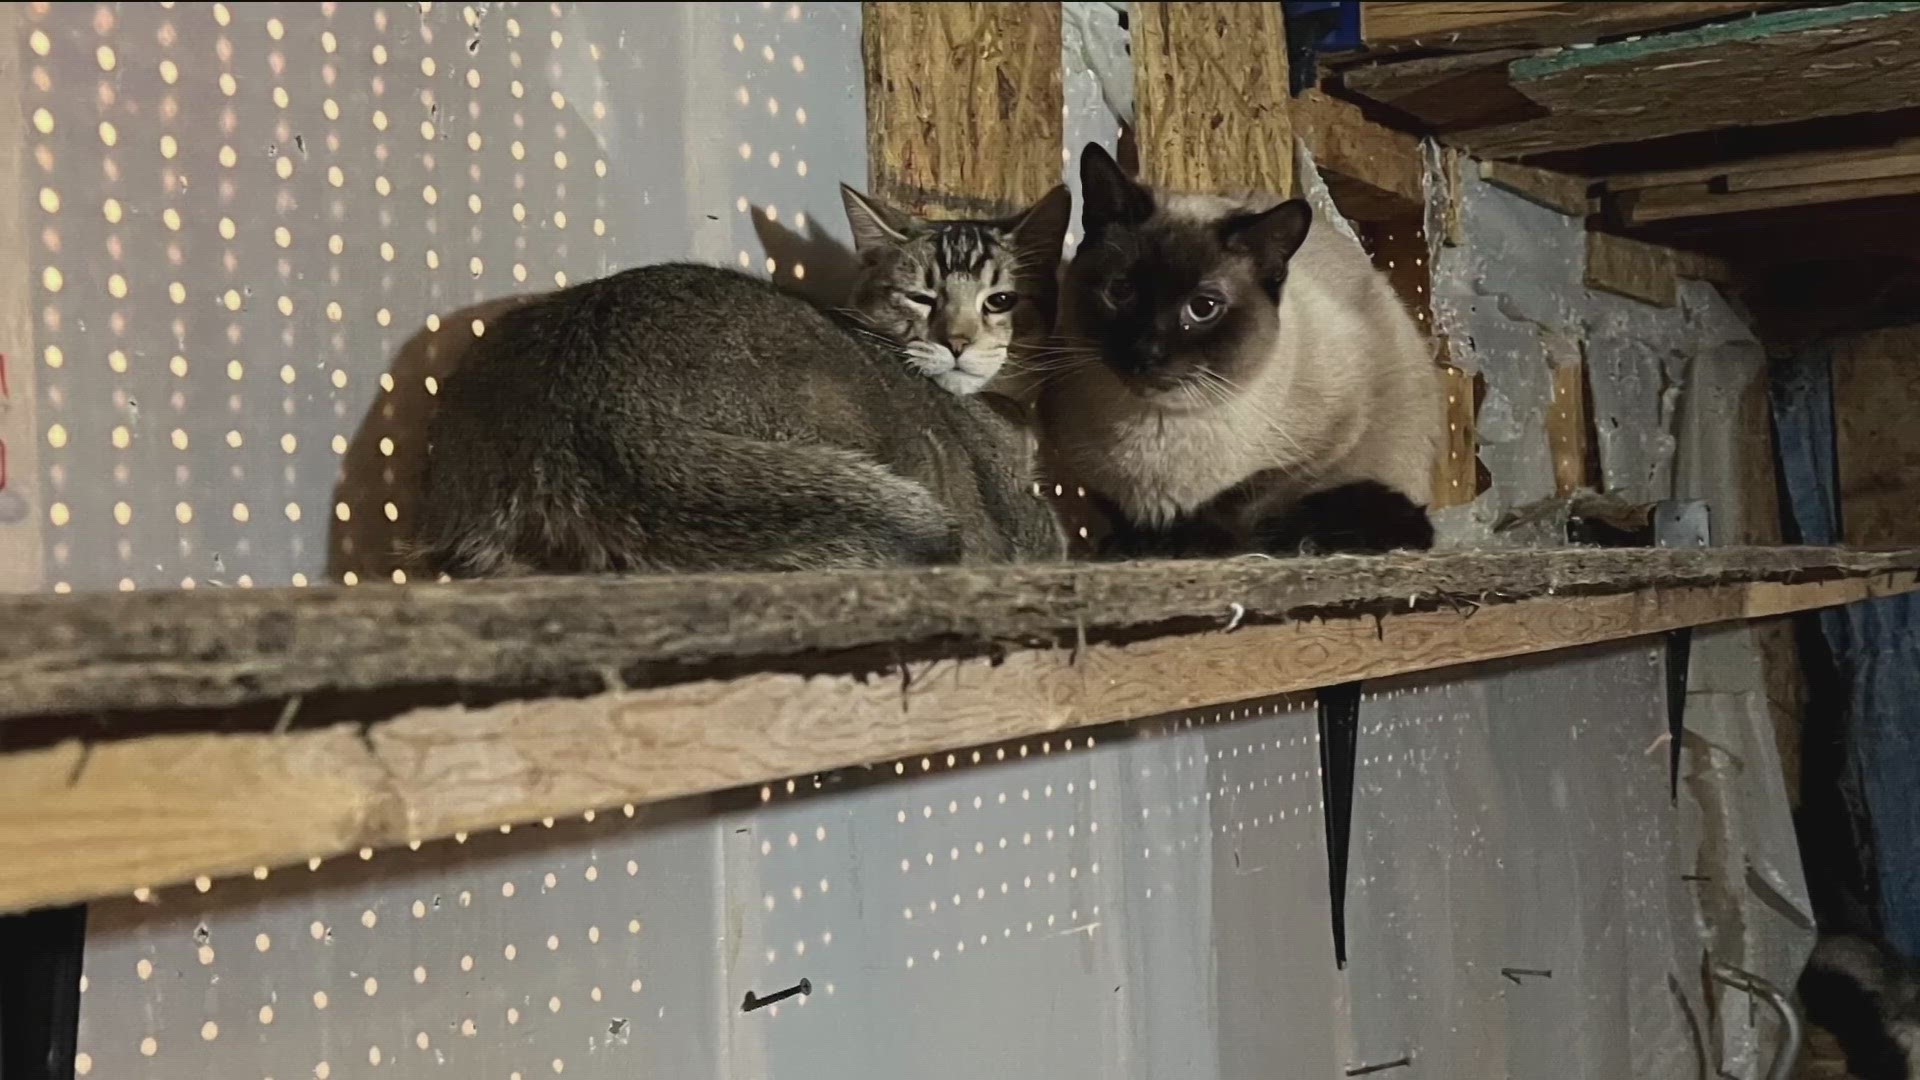 Nearly 80 cats were rescued from the foreclosed home in Coon Rapids. Support is now needed to help care for the cats before they can get adopted.